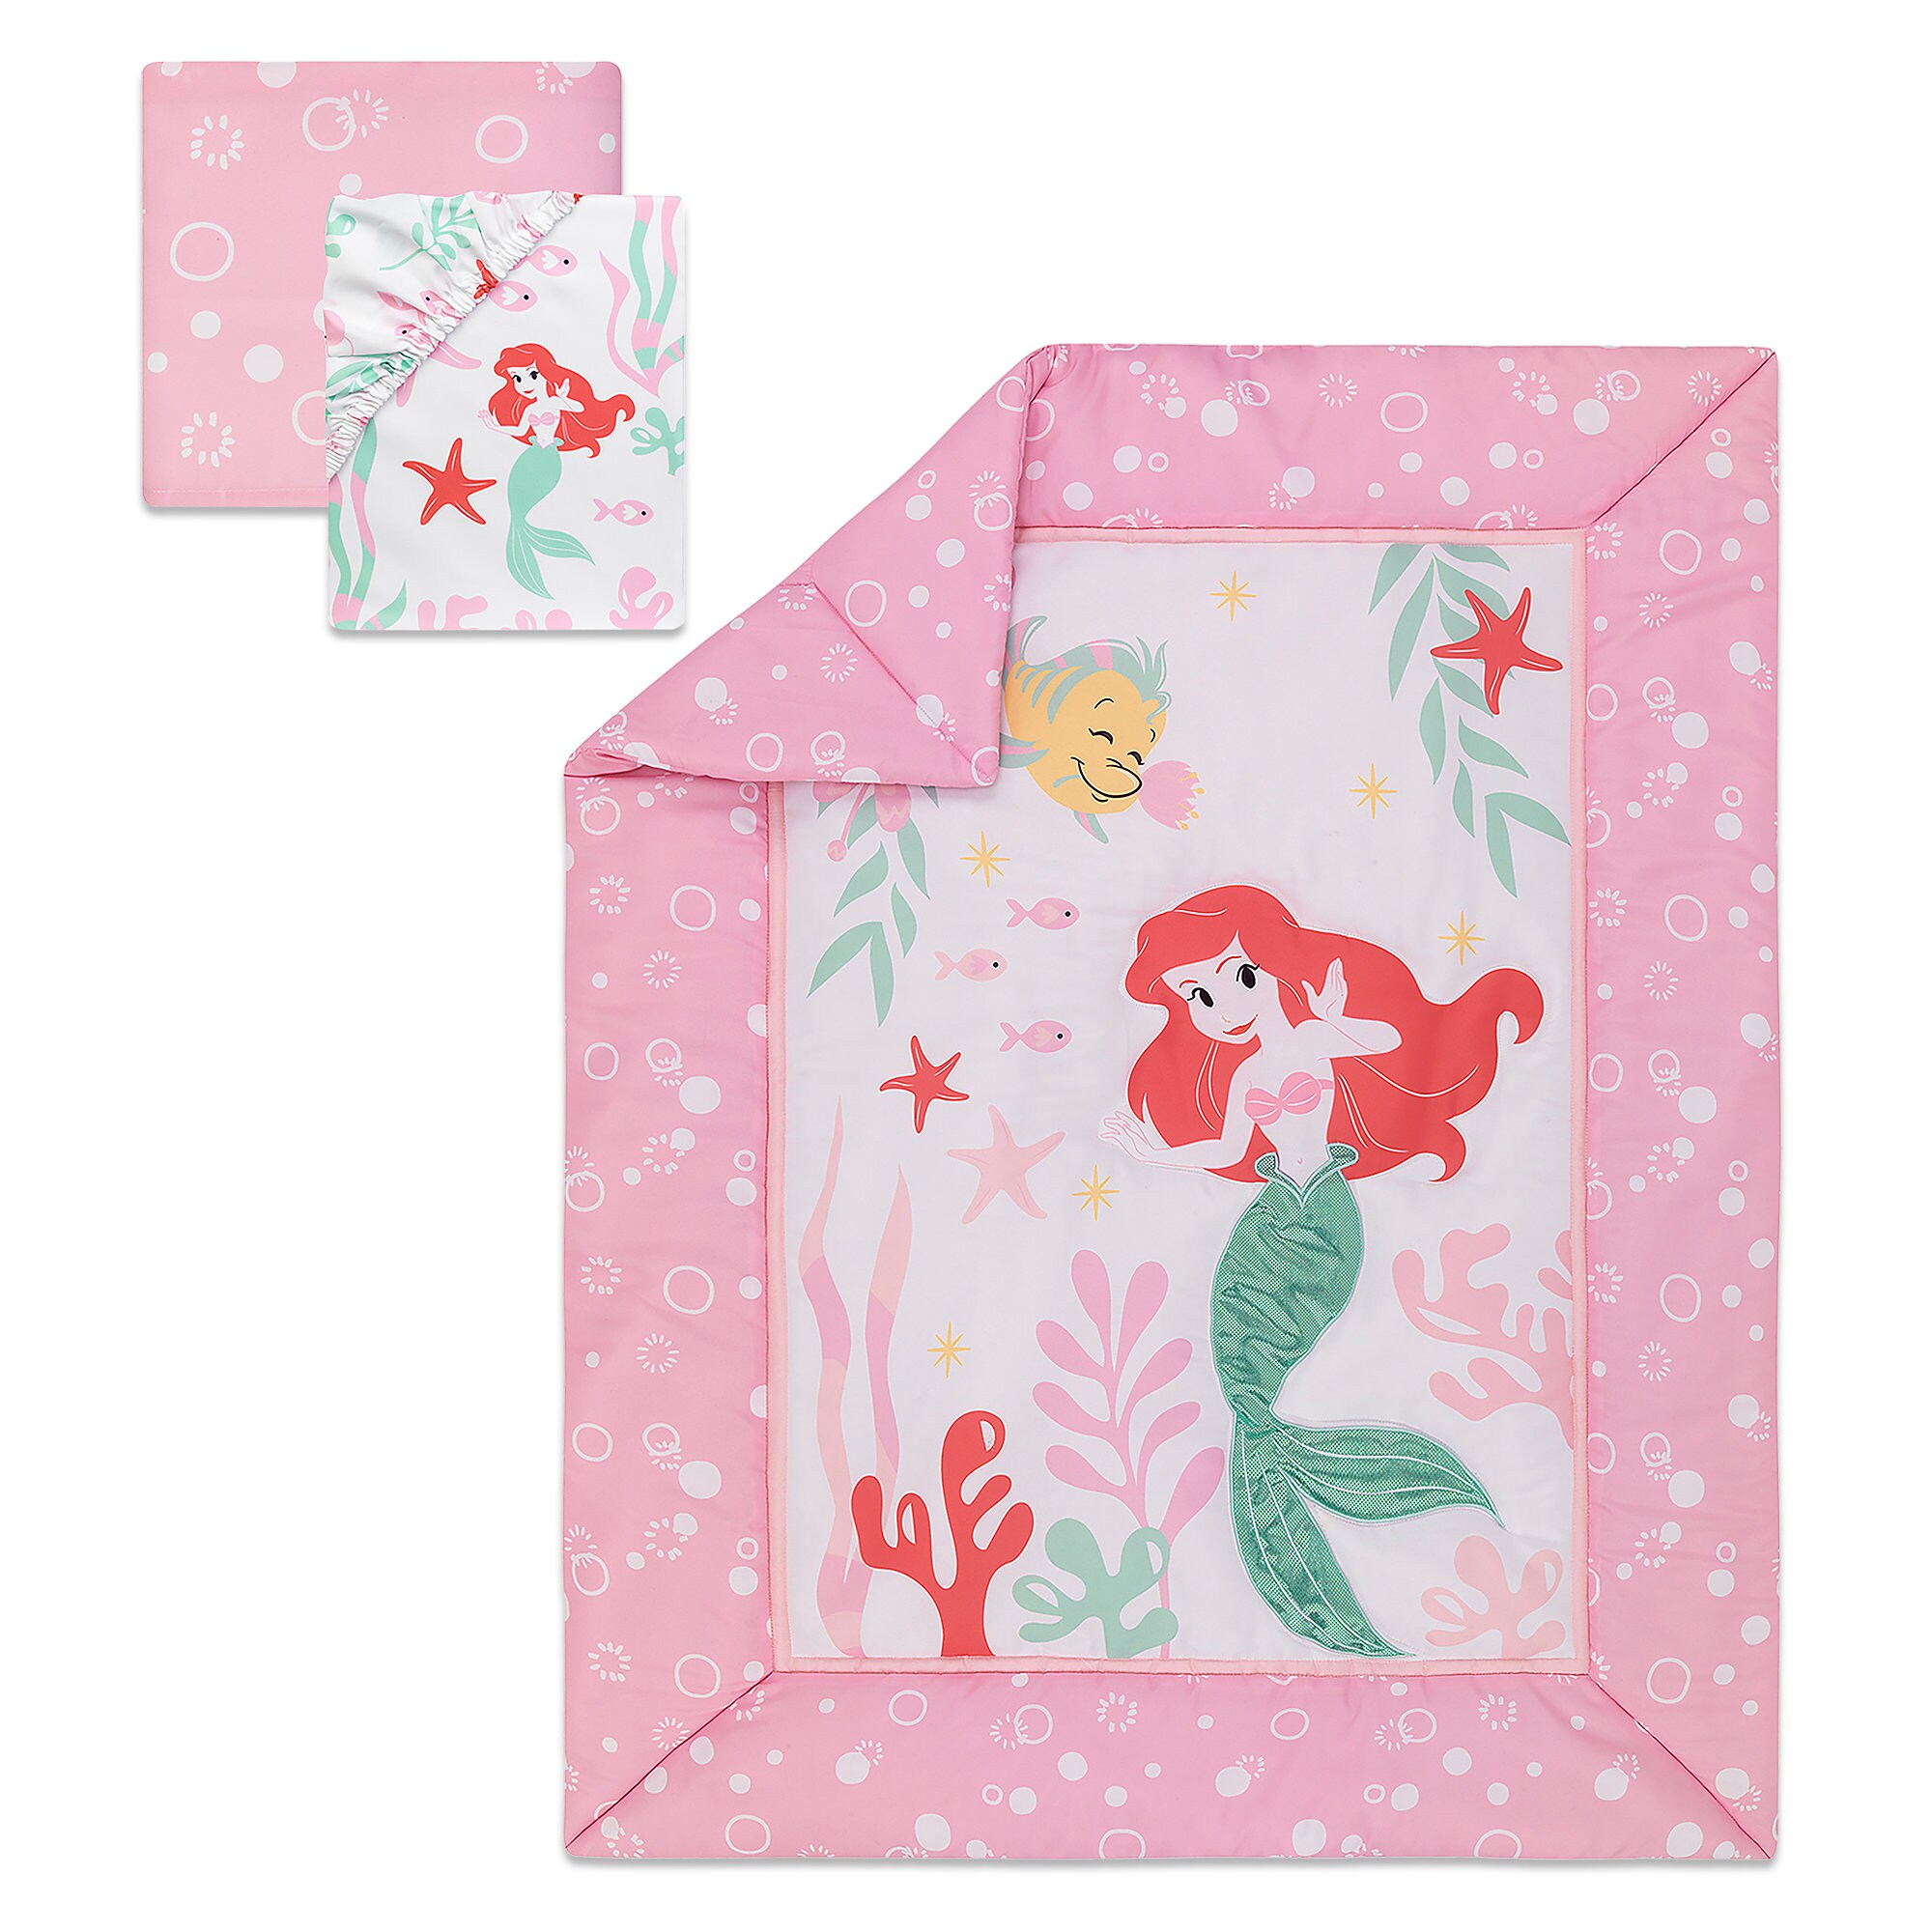 Ariel's Grotto Crib Bedding Set by Lambs & Ivy - The Little Mermaid